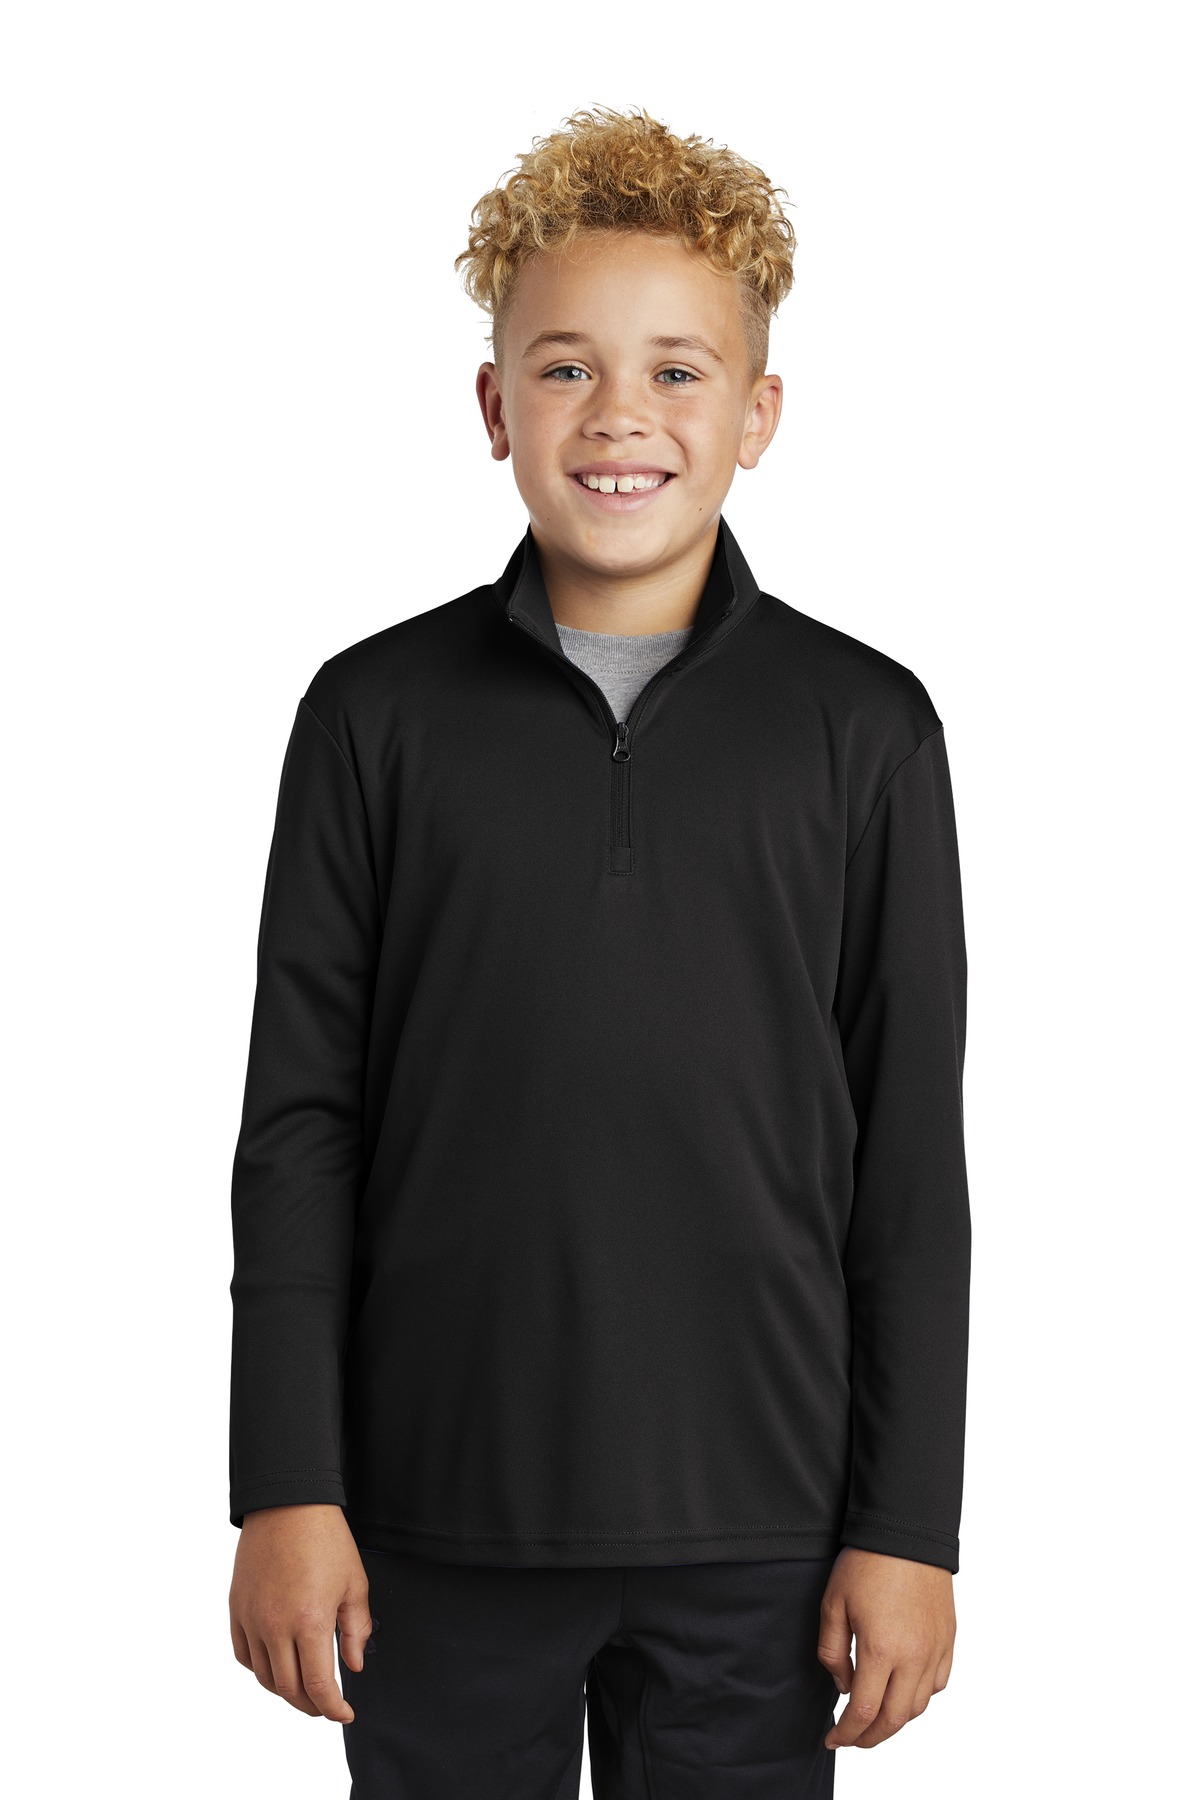 Sport-Tek Youth Sweatshirts & Fleece for Hospitality ® Youth PosiCharge ® Competitor 1/4-Zip Pullover.-Sport-Tek